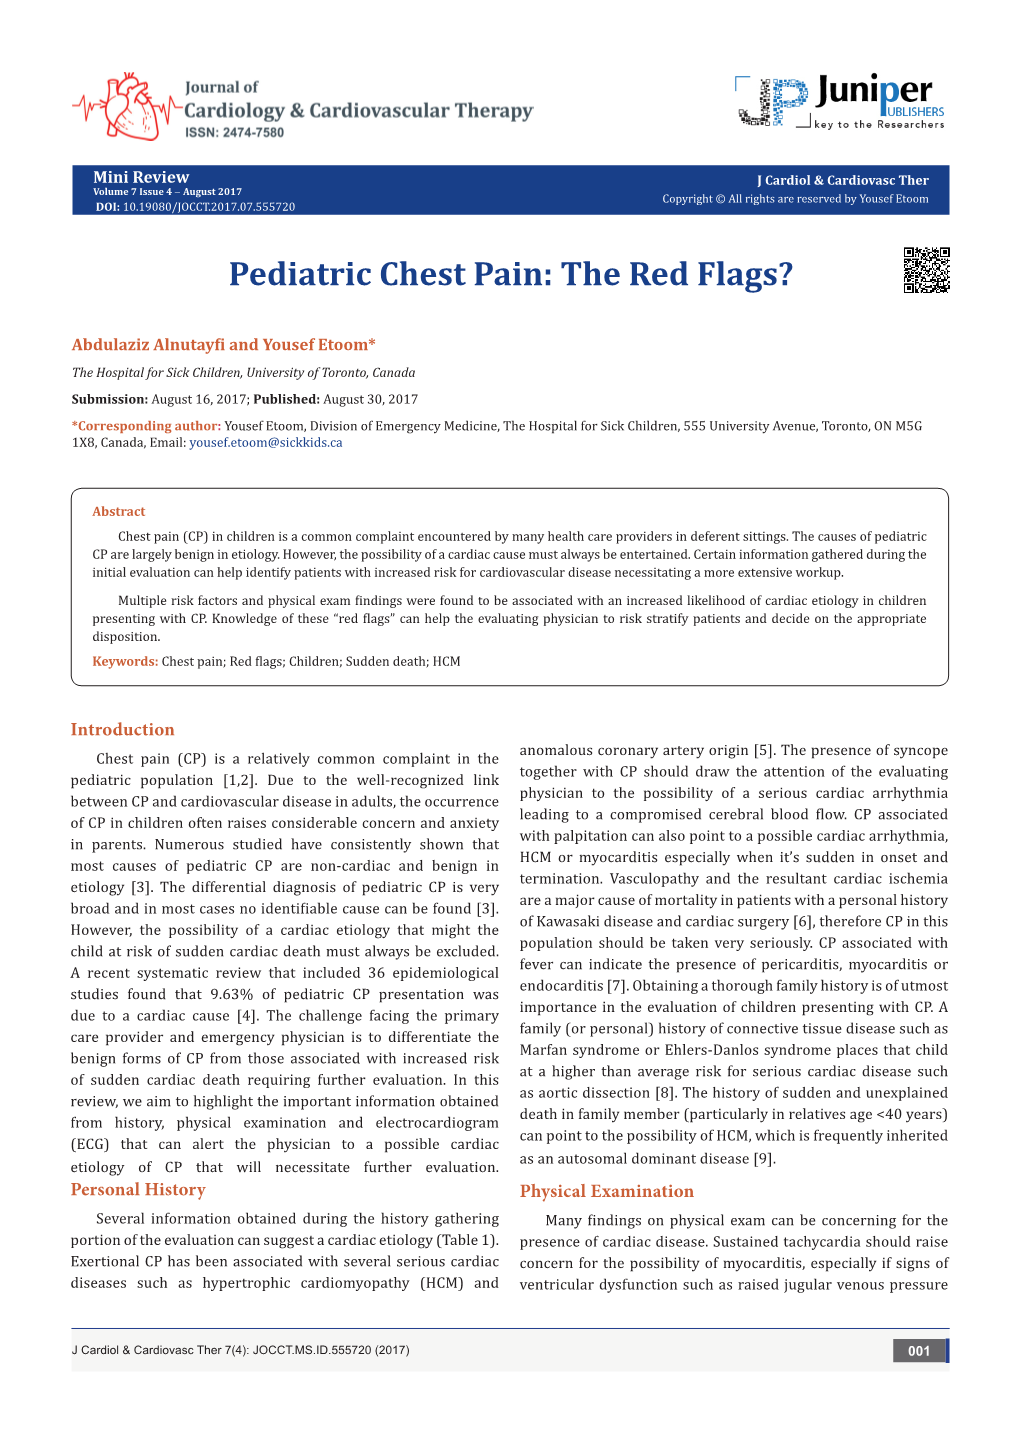 Pediatric Chest Pain: the Red Flags?